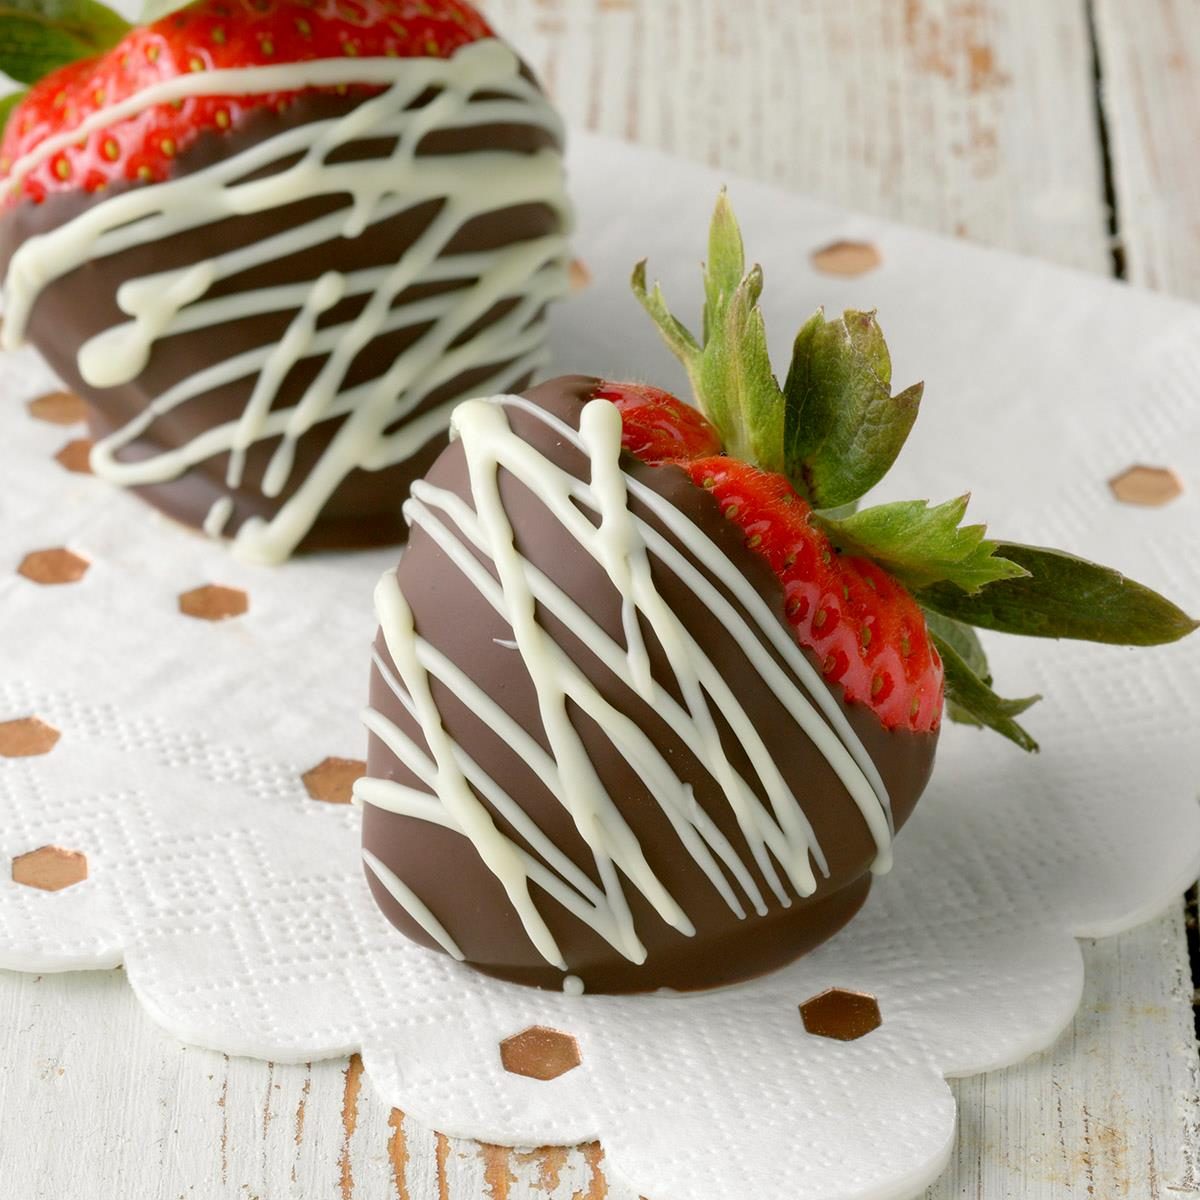 How to Make Chocolate Covered Strawberries - Cooking for the Holidays